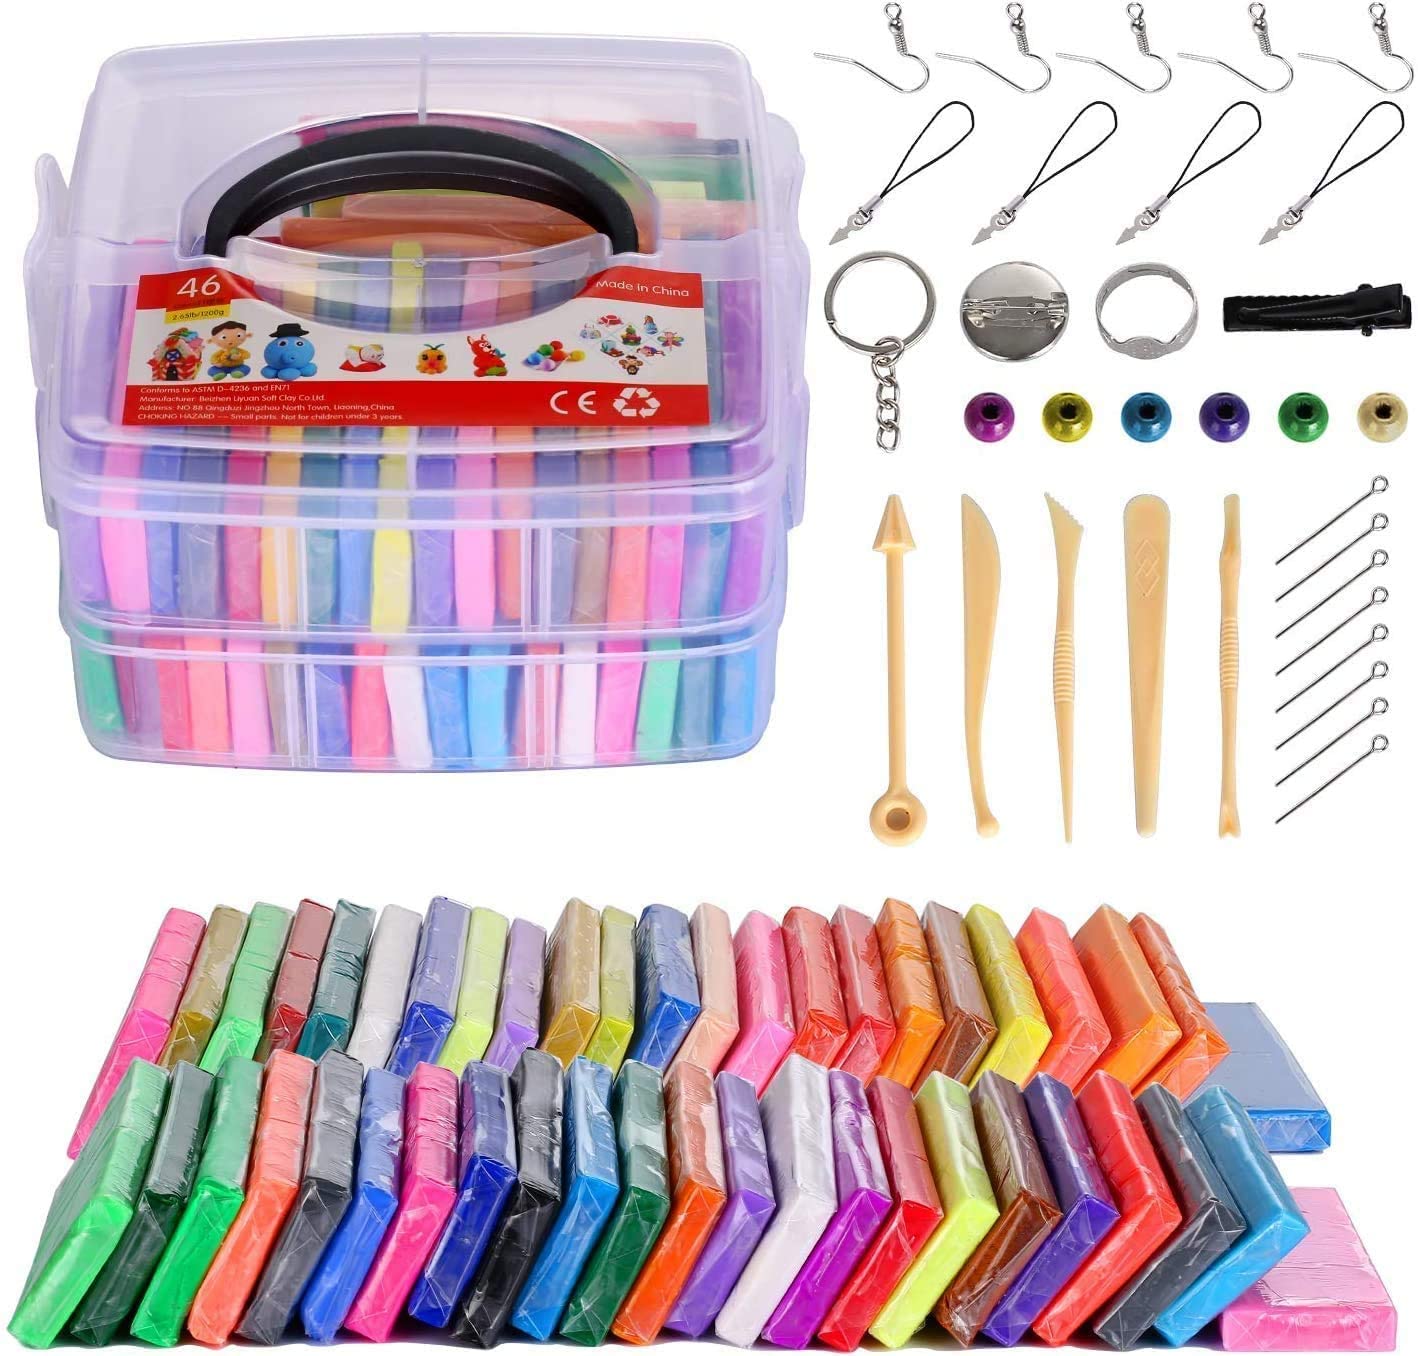 12 of the best polymer clay kits - Gathered